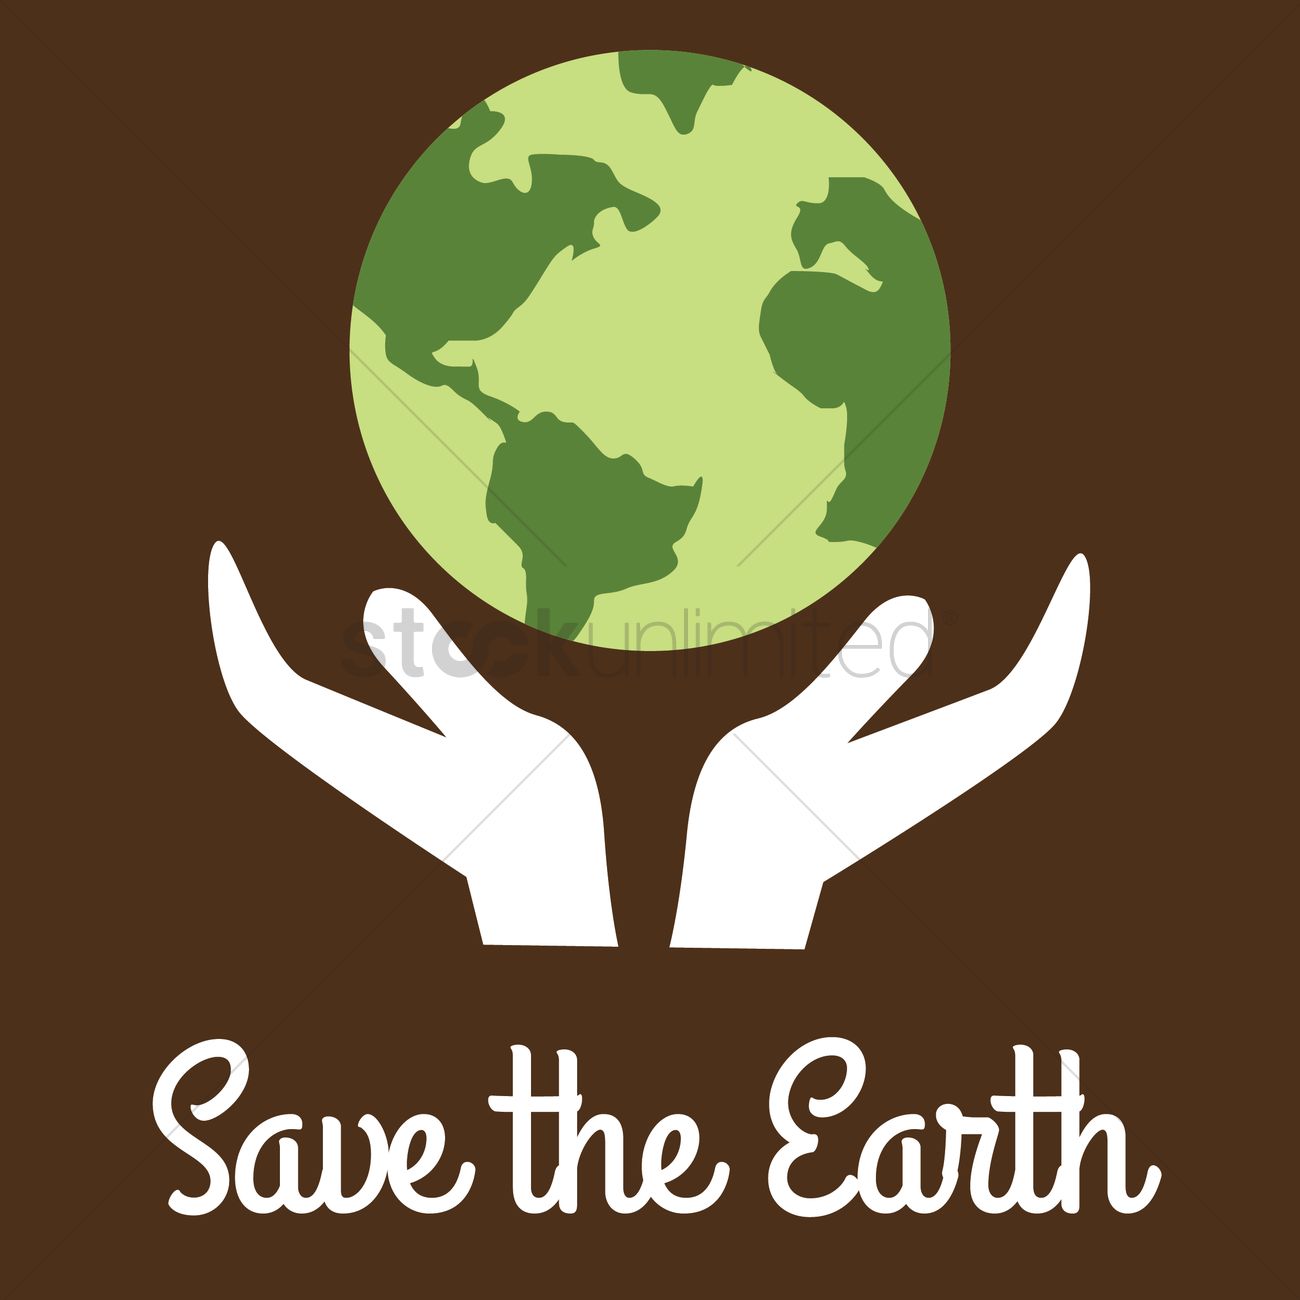 Save Earth Images Wallpapers